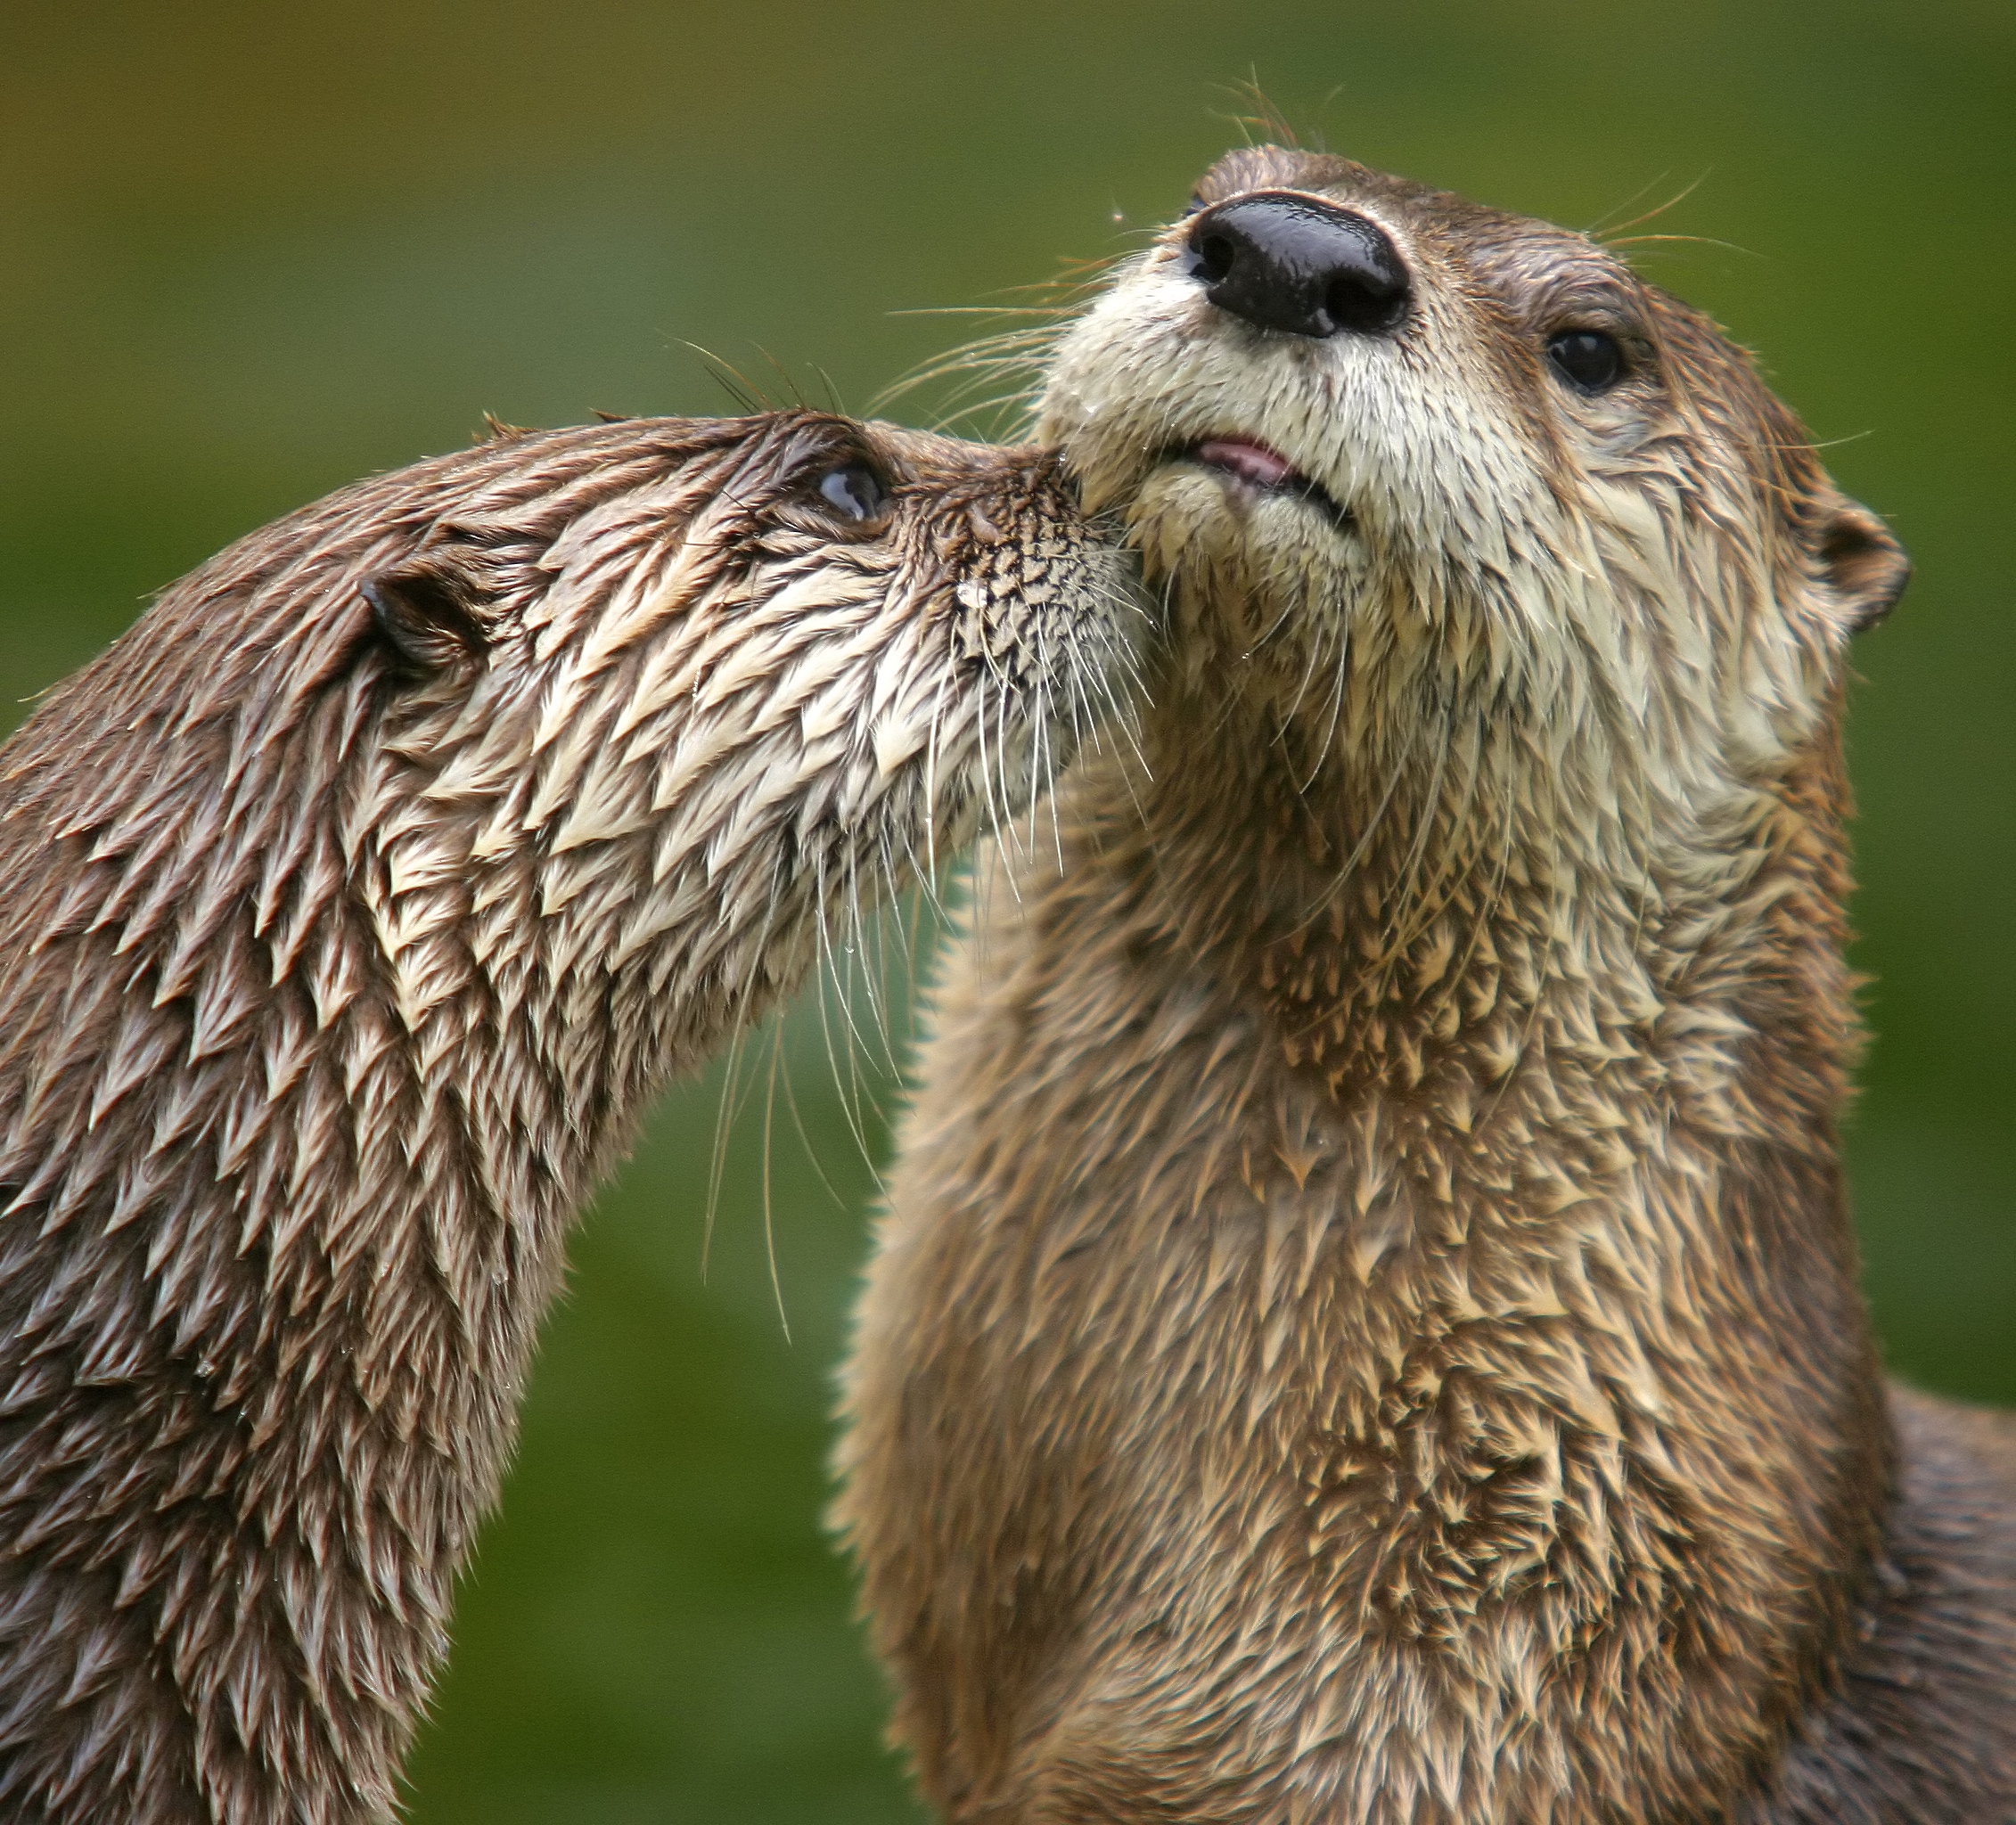 Closeup of two river otters nuzzling each other.